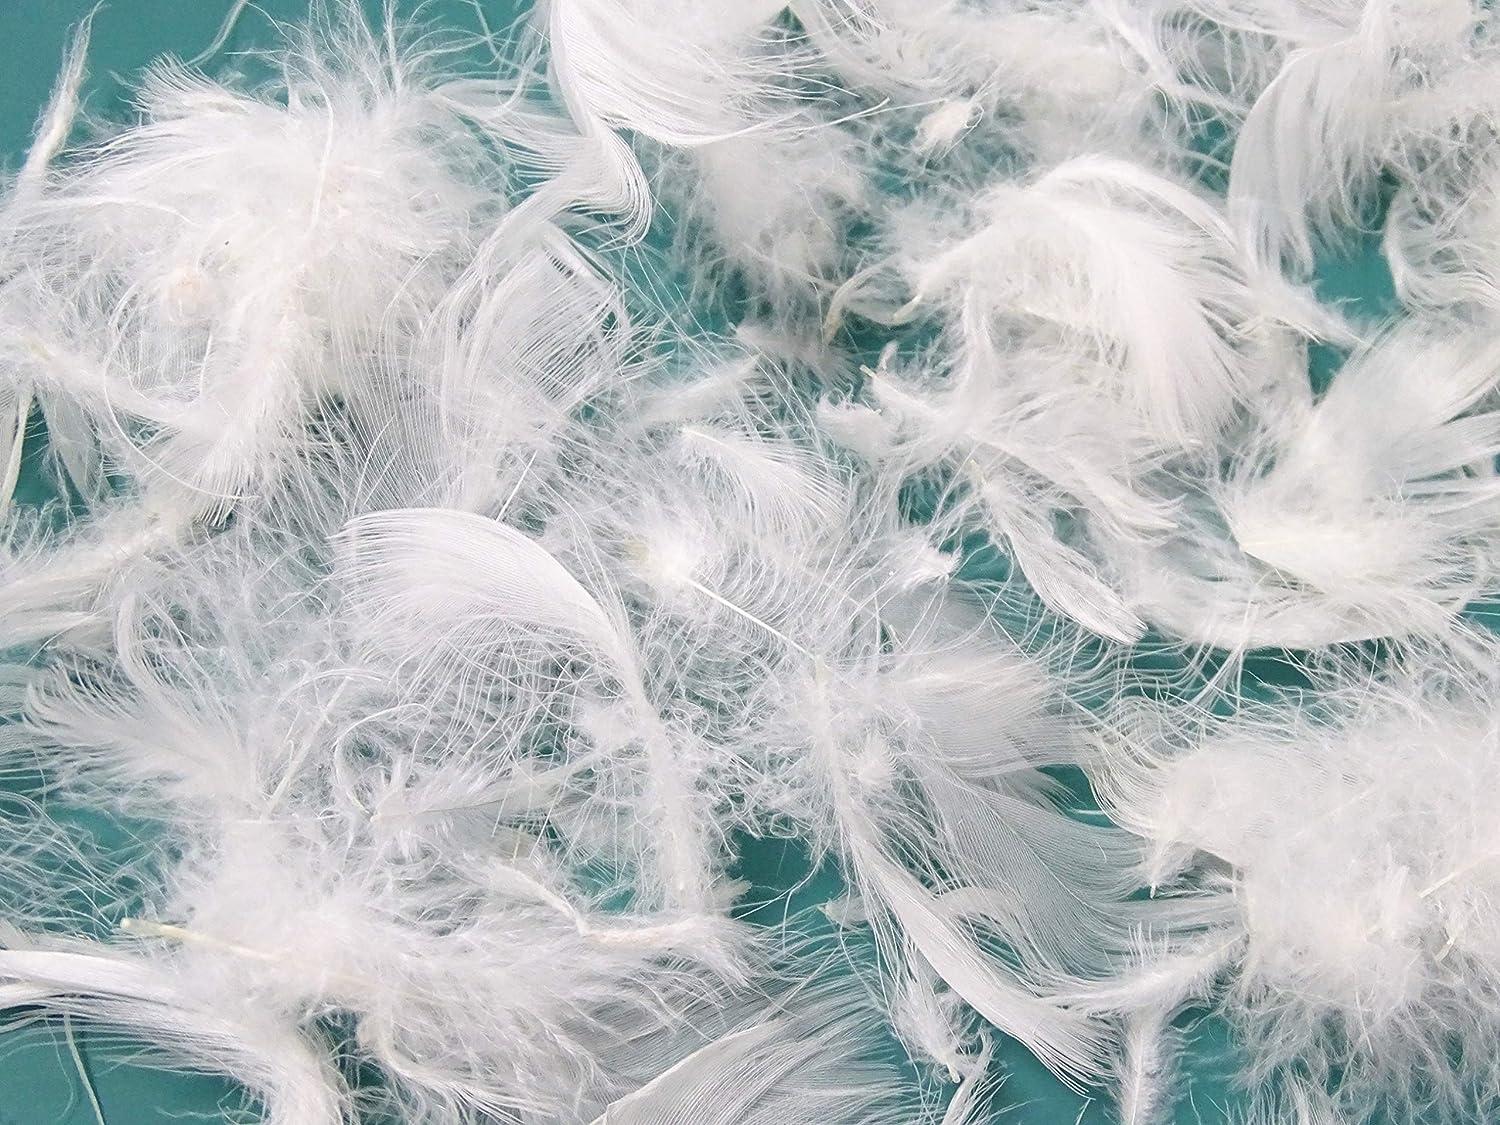 Variety Of Soft And Fluffy Wholesale large goose feathers 